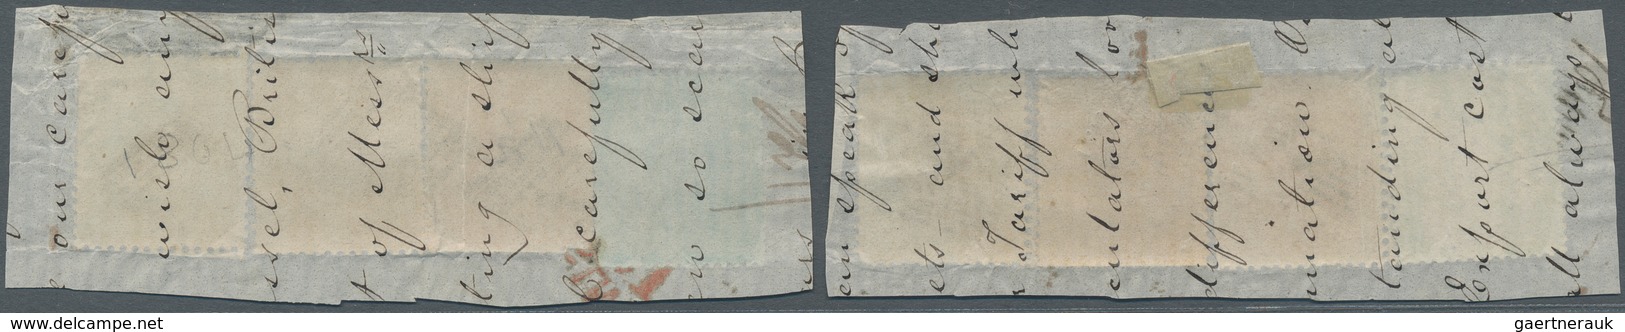 Indien: 1855-1864, Multi-colour Franking Fragments From A Correspondence From India To The United St - 1854 East India Company Administration